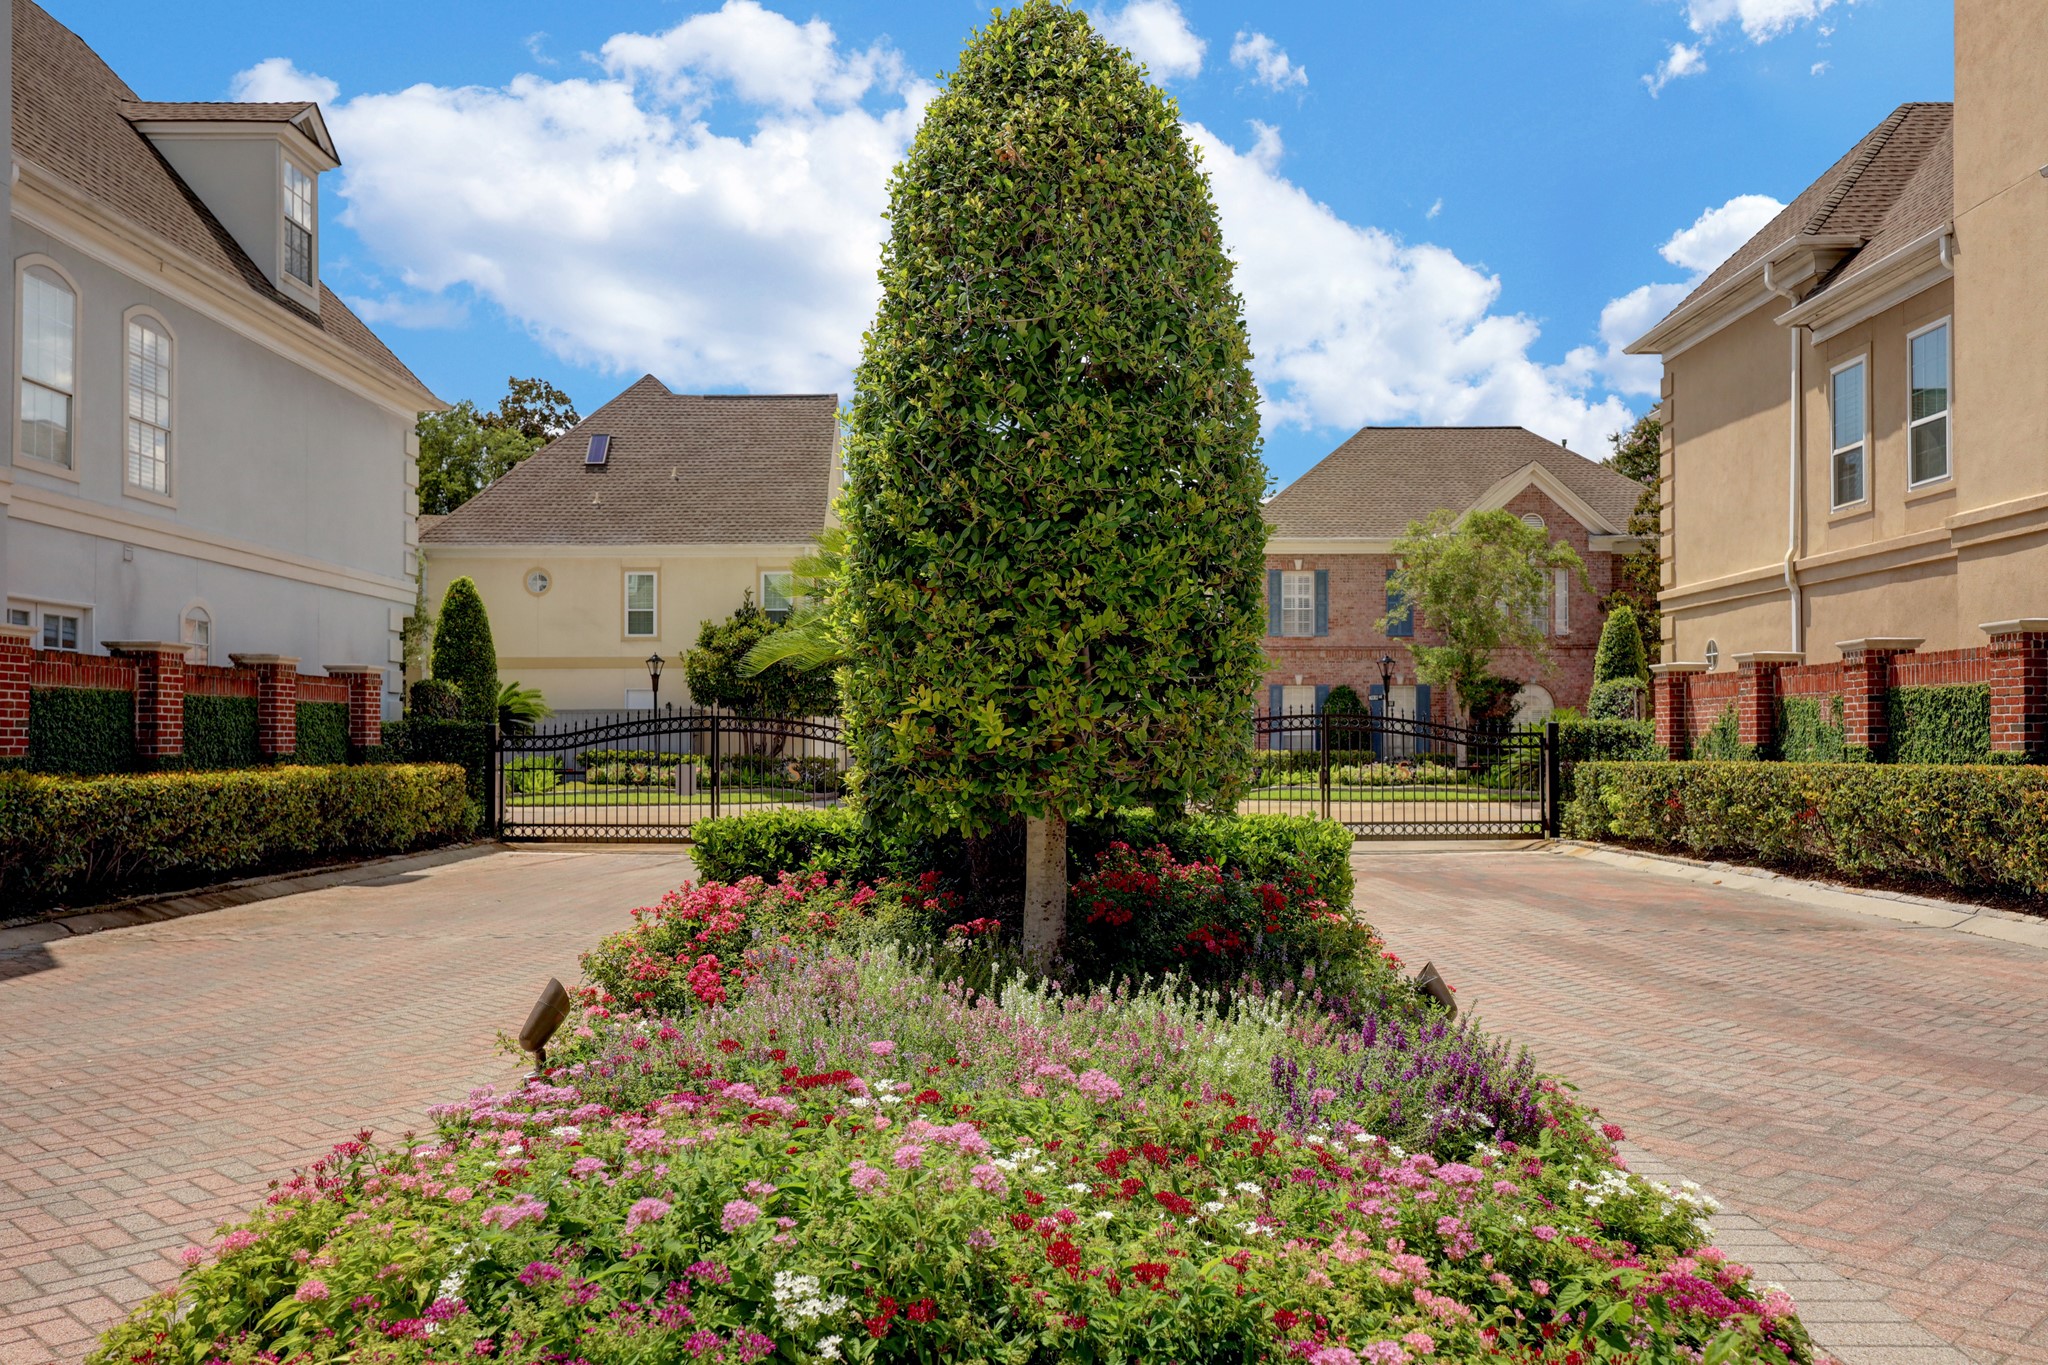 The community is well-maintained and gated for added security.  The entrance is beautifully landscaped with an abundance  of colorful plantings.